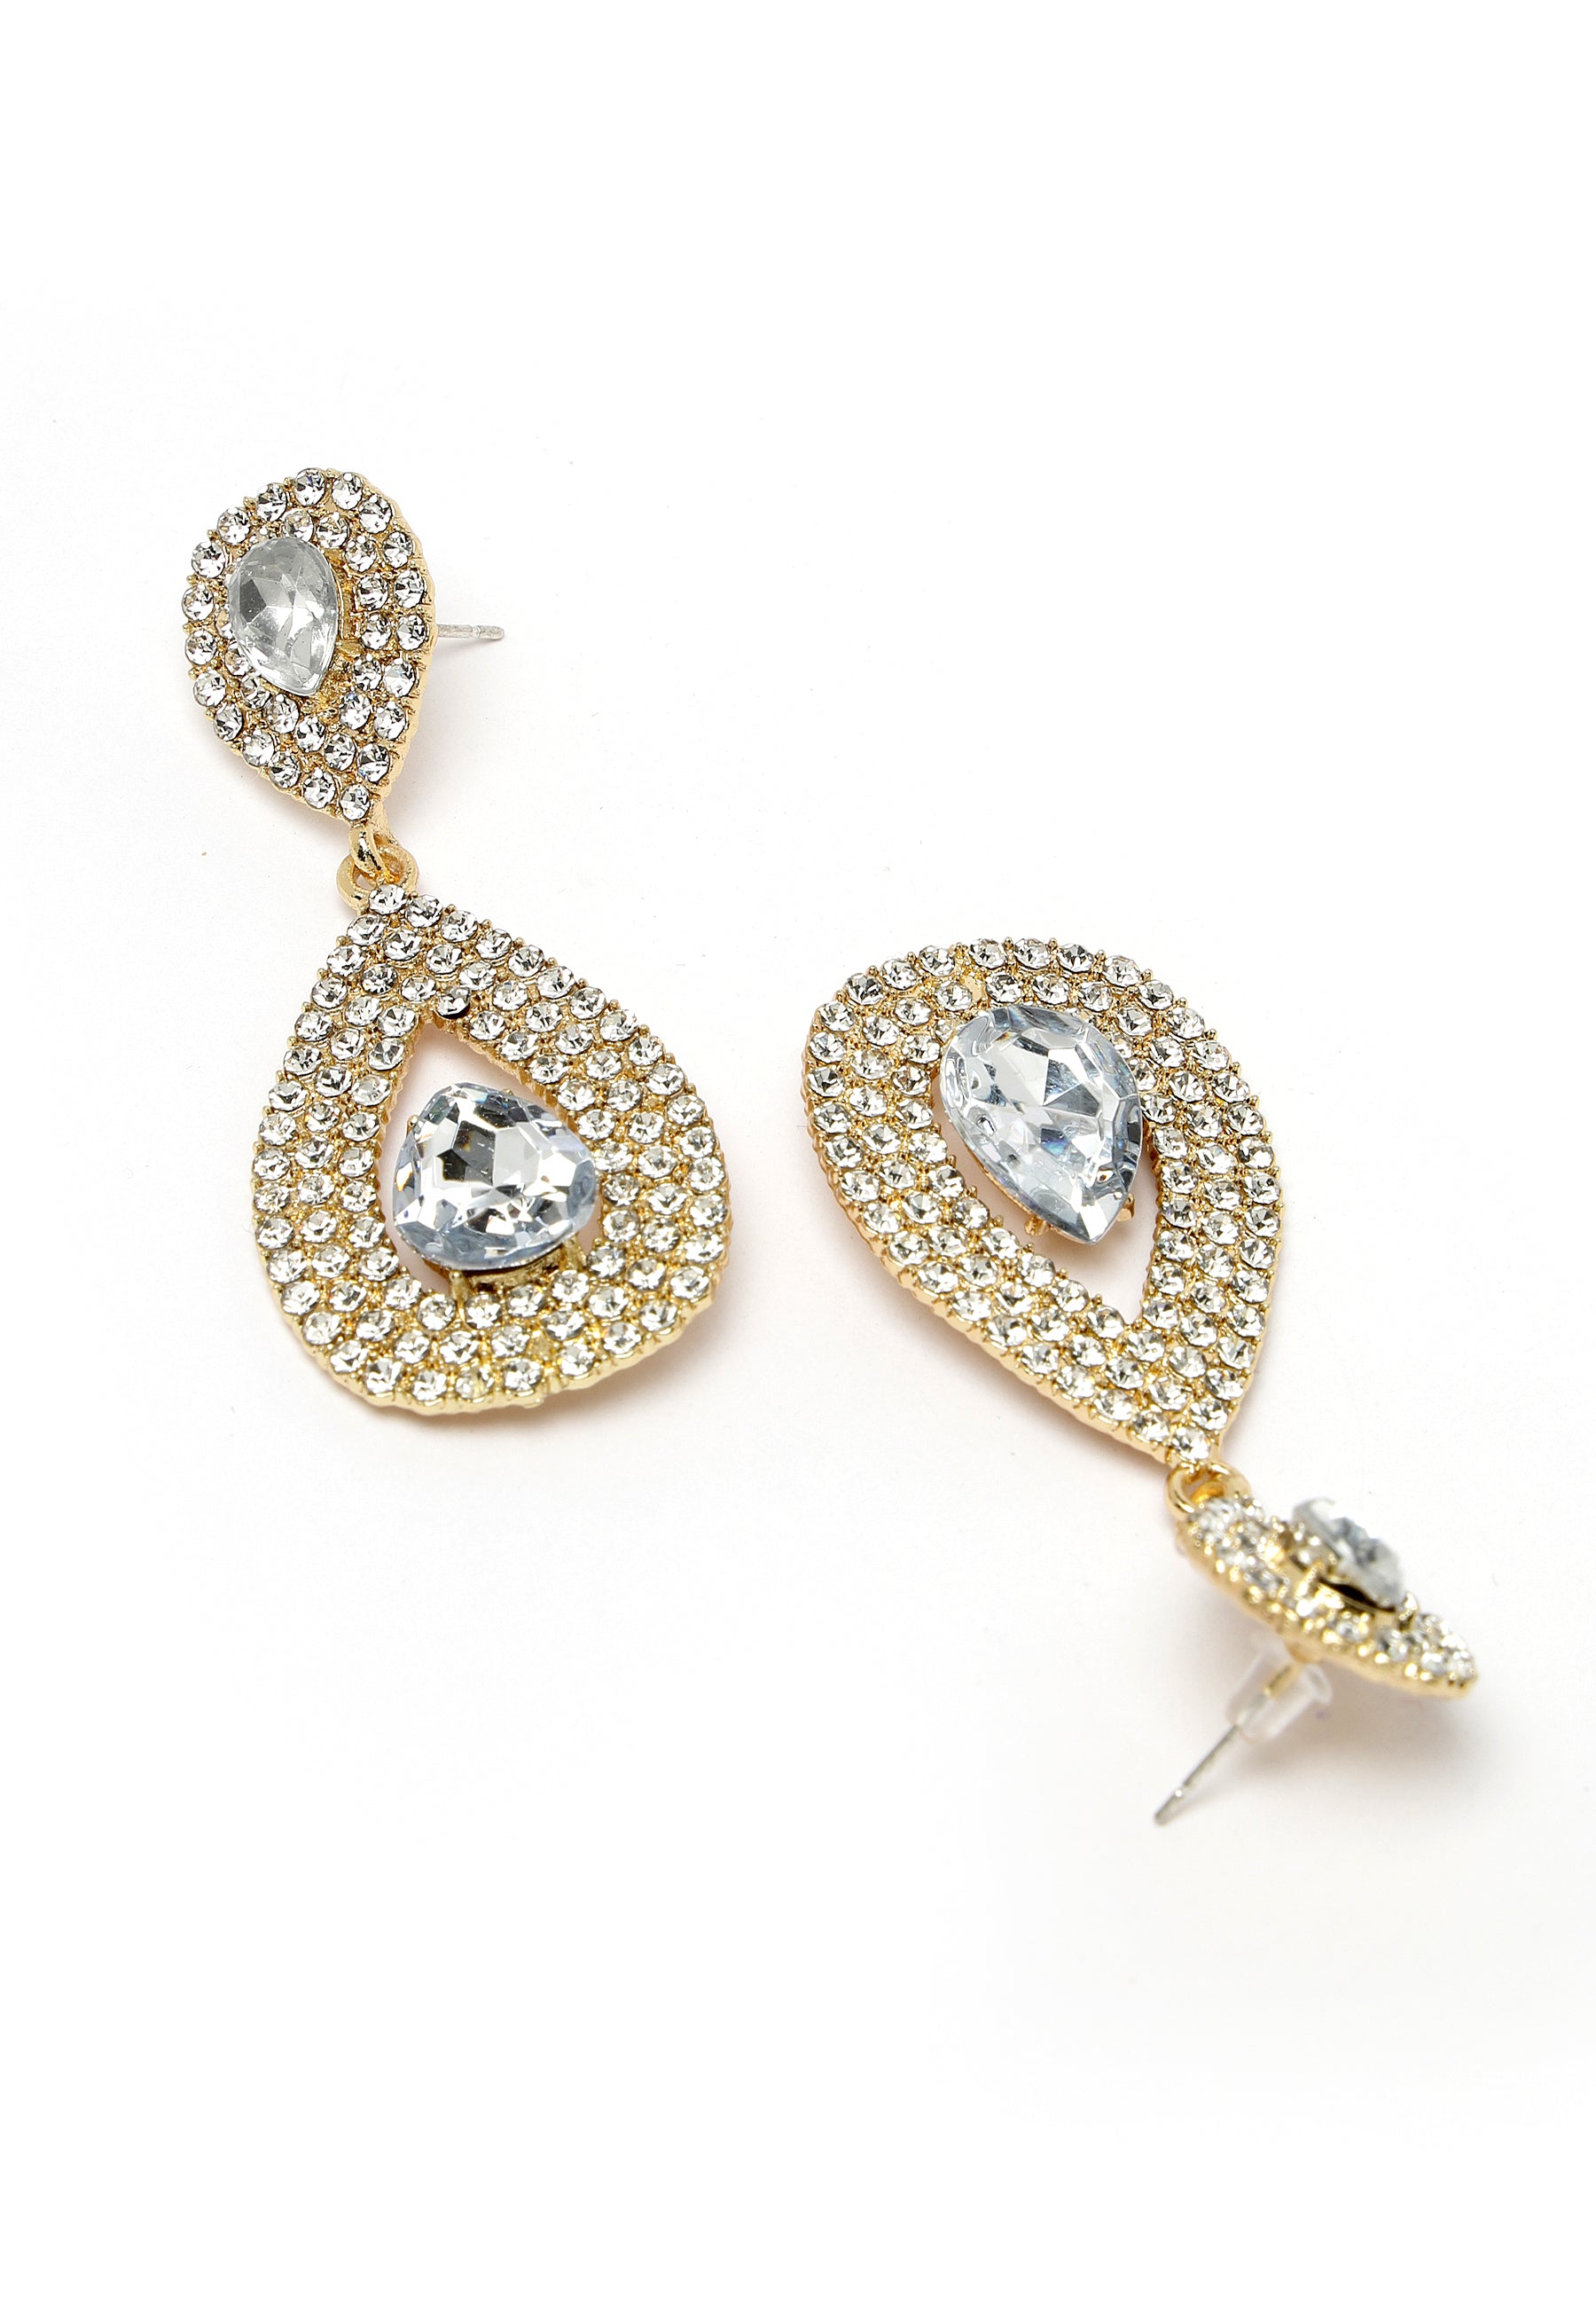 Gold-Colored Water Droplet Crystal Earrings